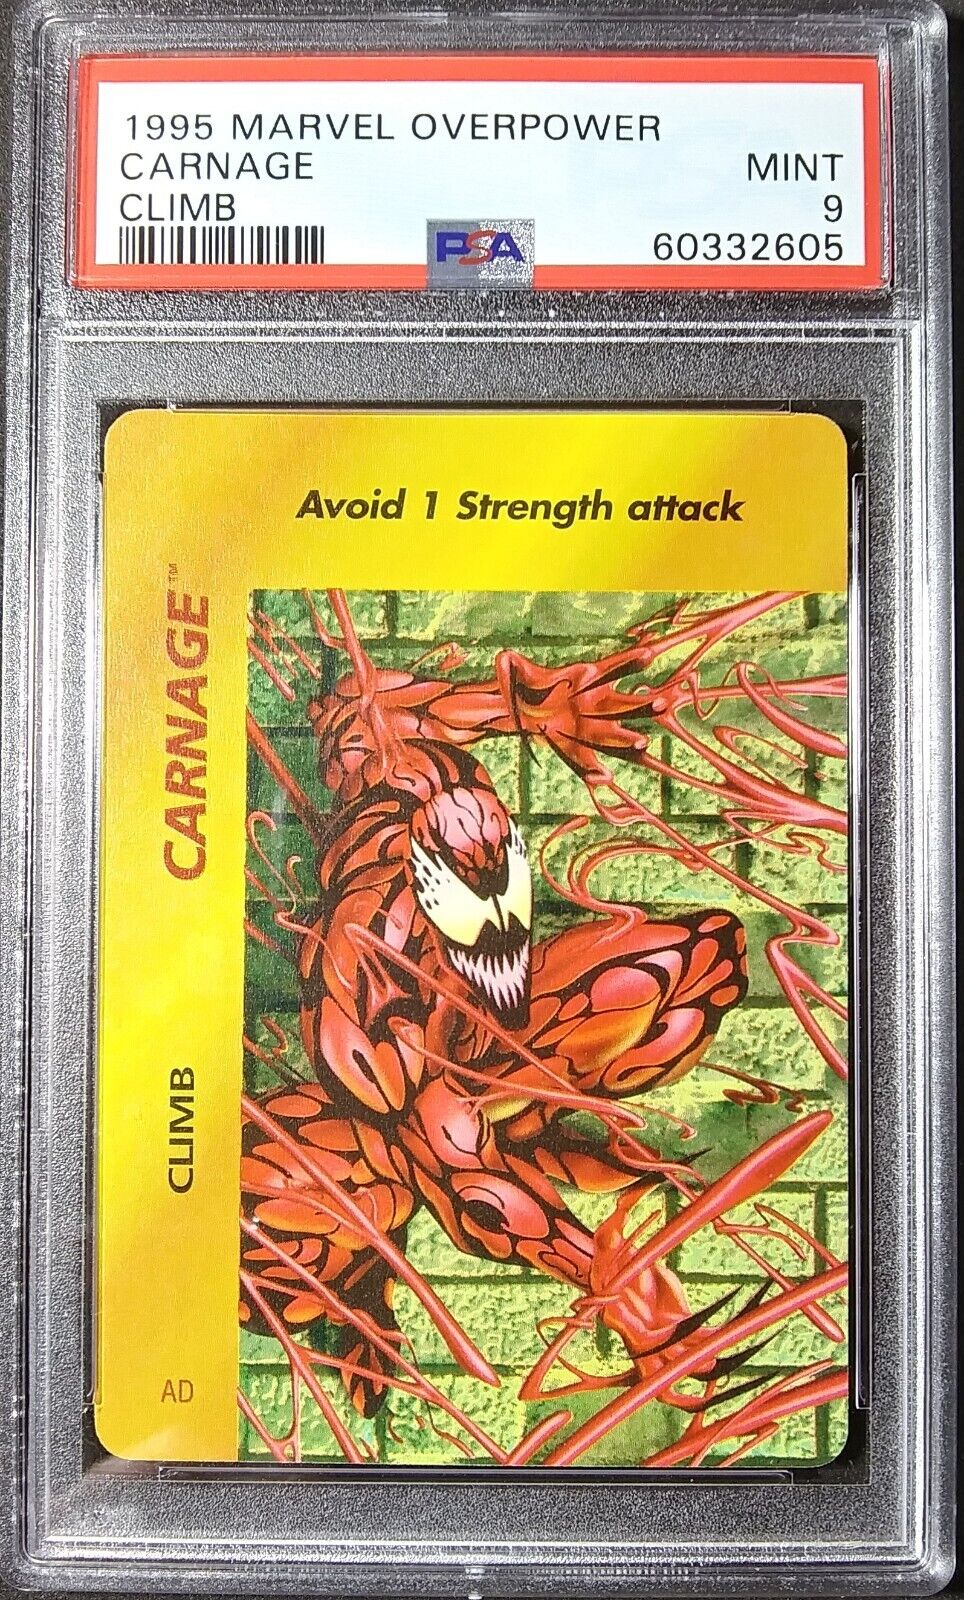 1995 Marvel Overpower CLIMB Special Character Card #AD-CC CARNAGE CCG MINT PSA 9